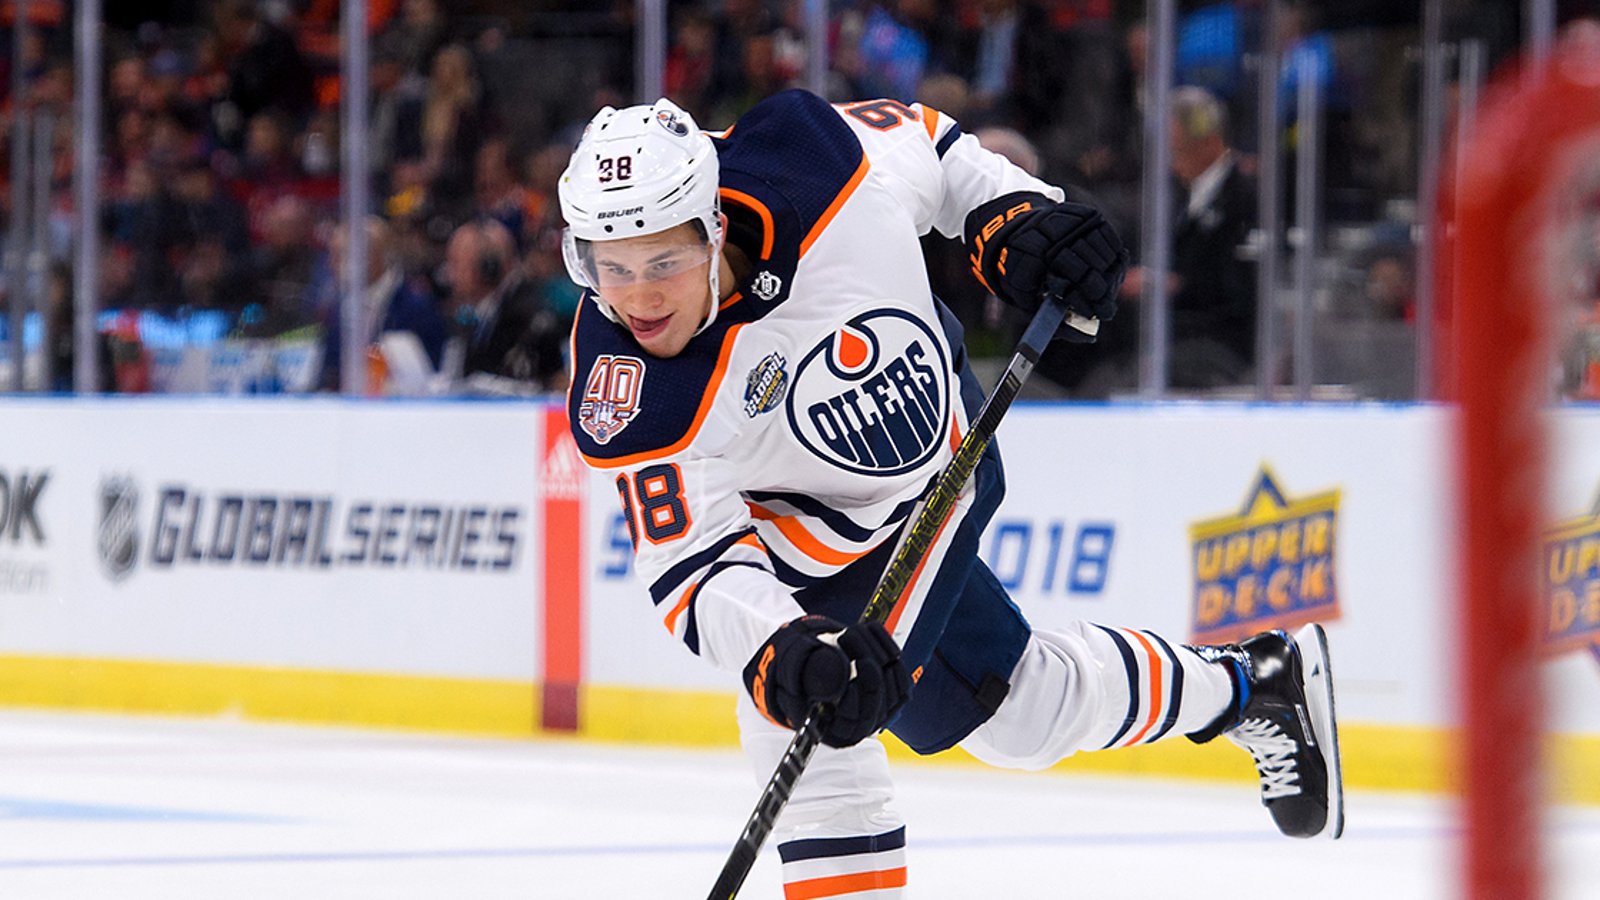 Breaking: Puljujarvi threatens Oilers, plans to withhold services